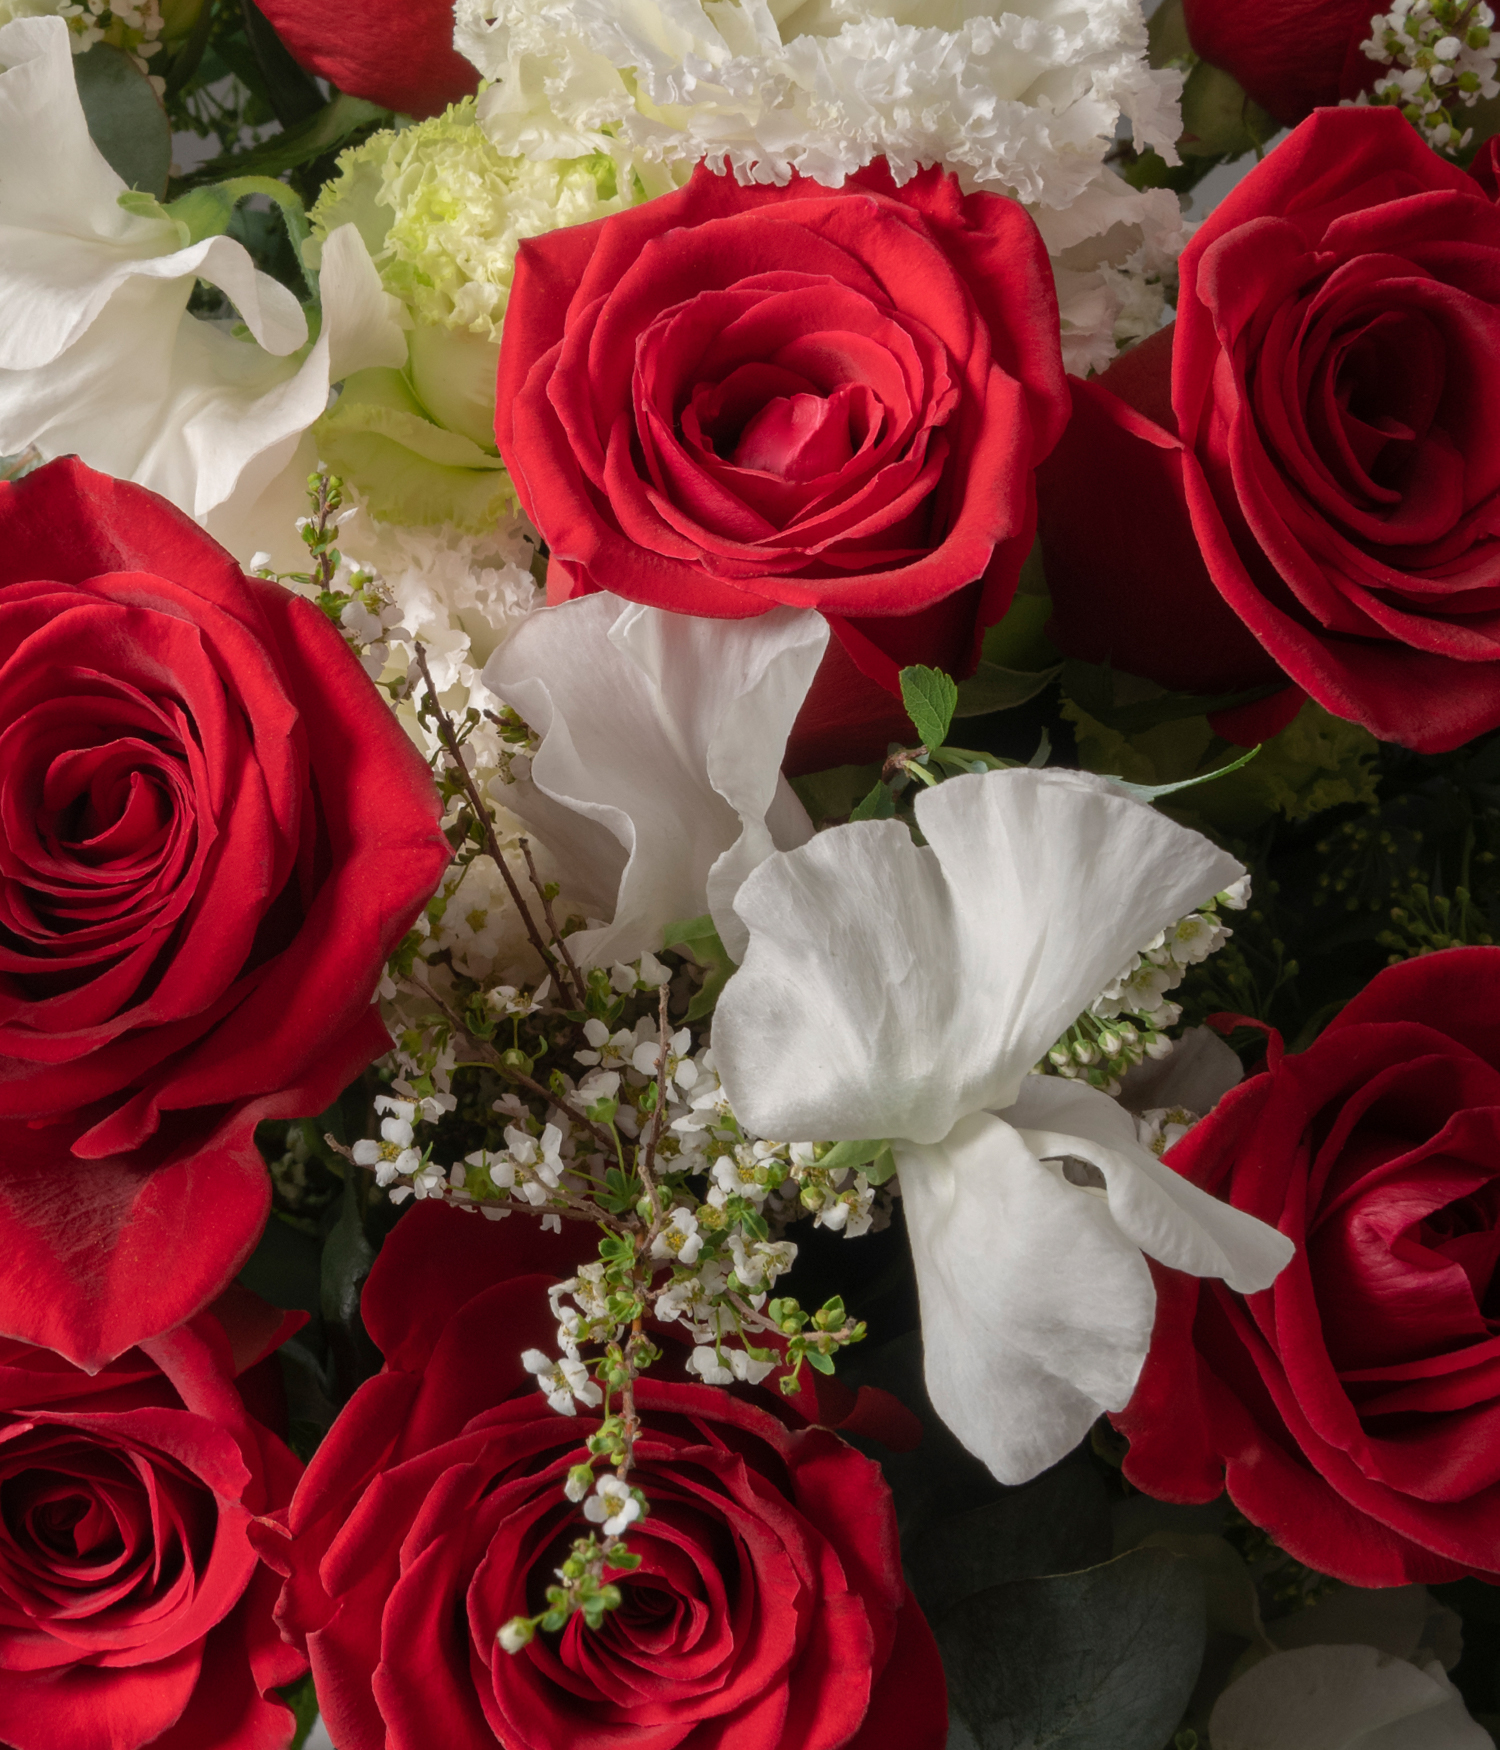 Detail of Scarlett Red Rose flower bouquet by flannel flowers from limited edition Valentine's Day collection